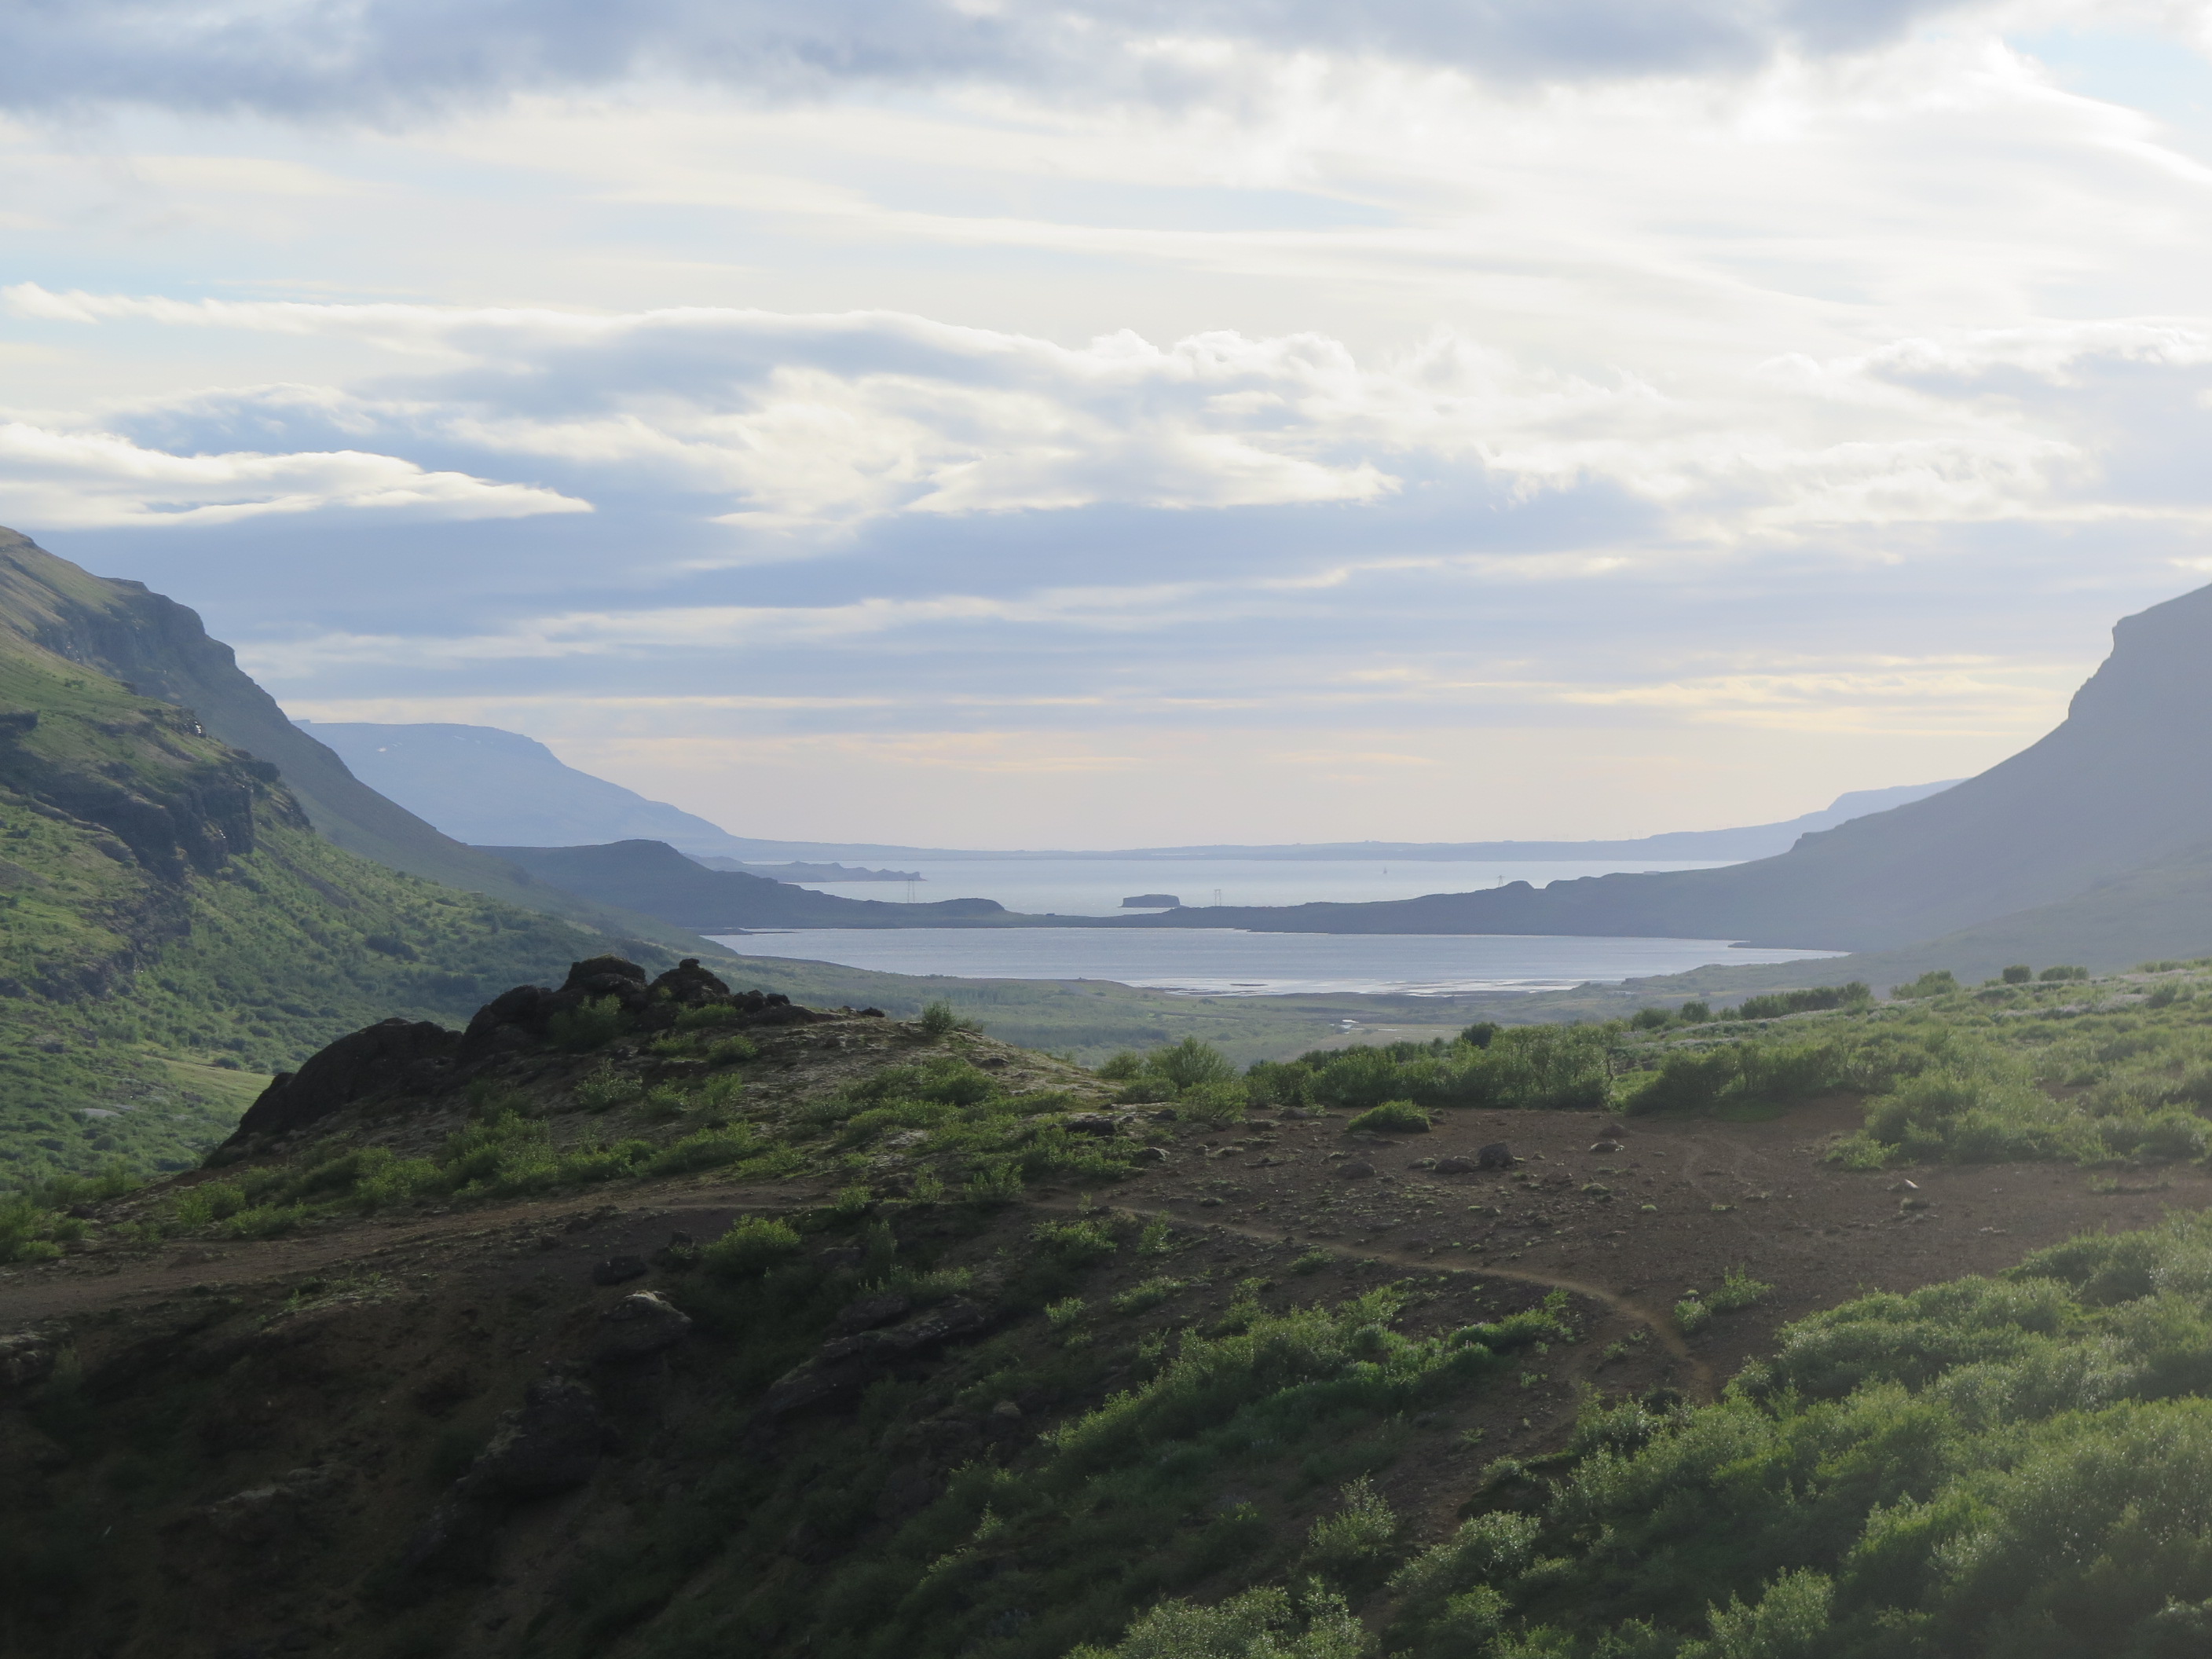 Botnsdalur valley and Hvalfjordur fjord from Glymur canyon. 